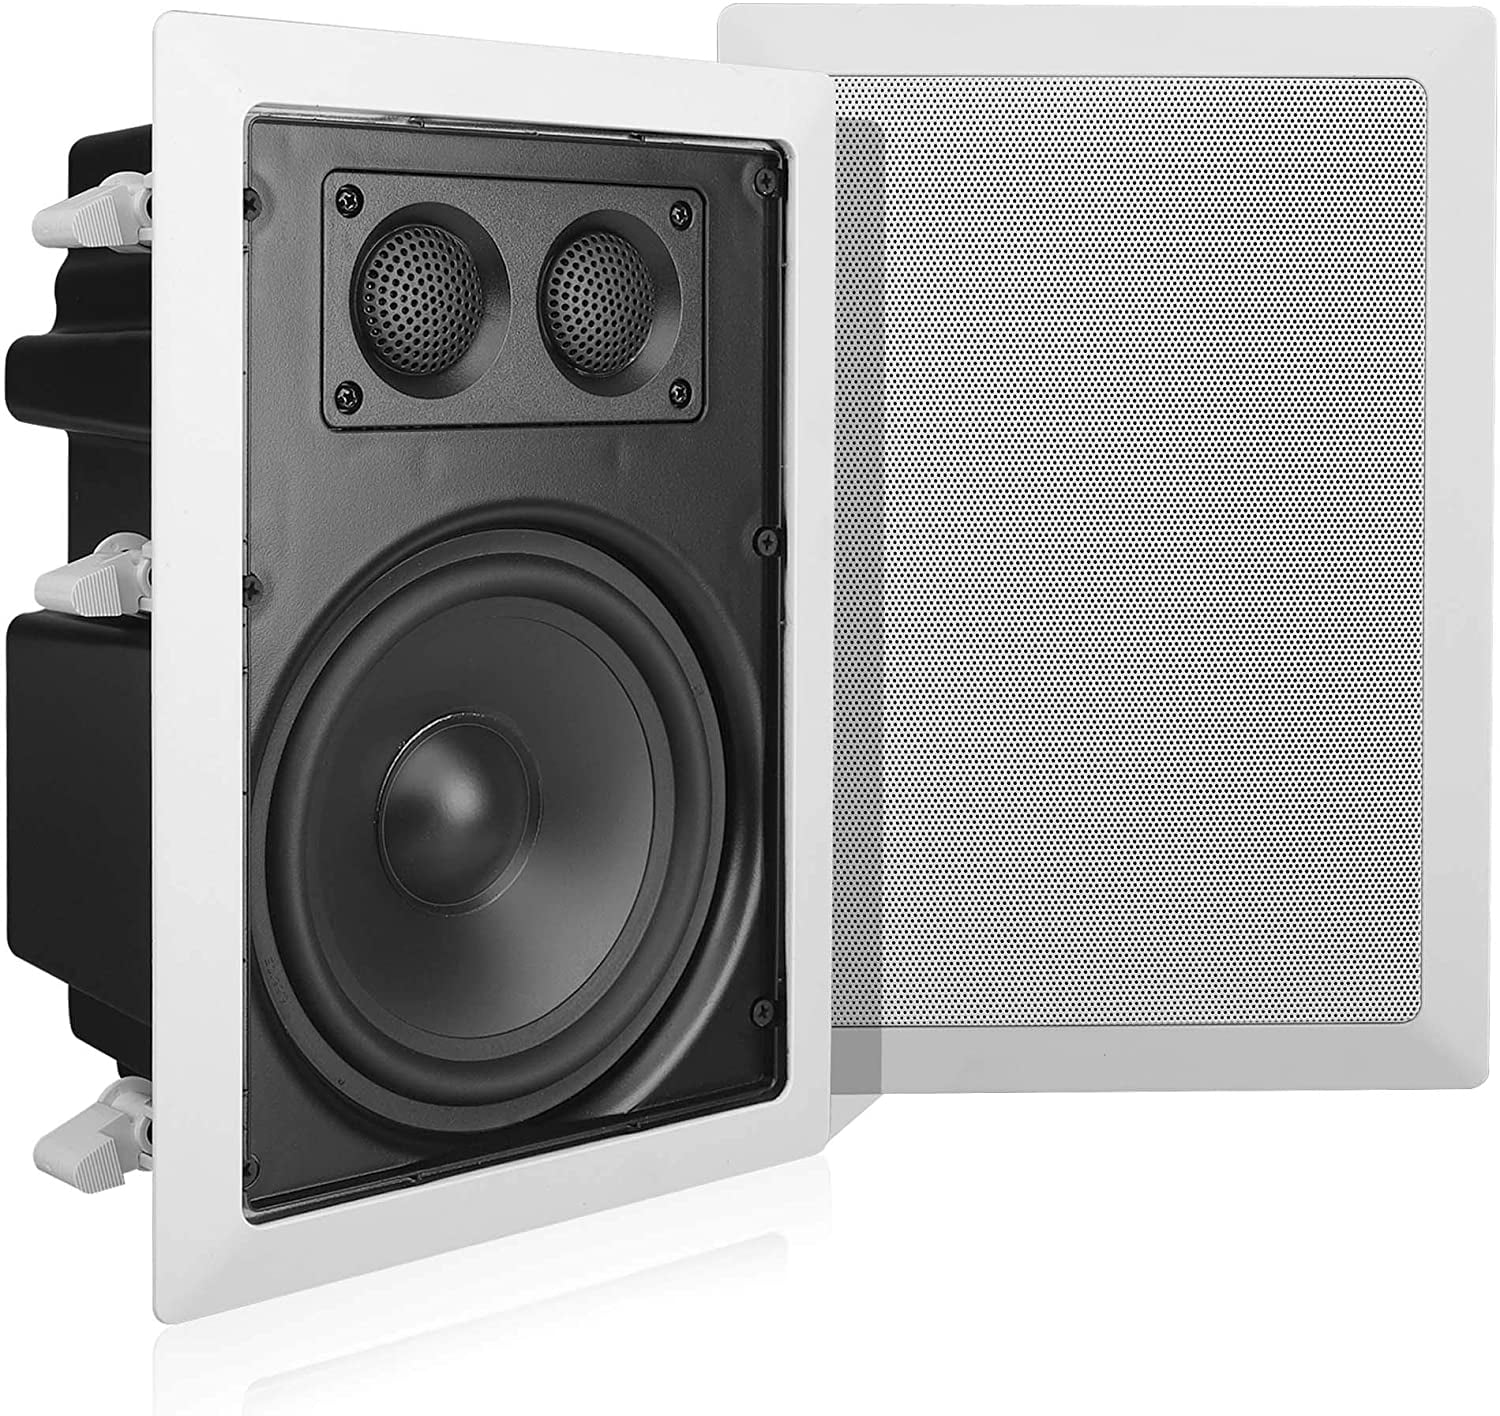 Pyle In-Wall / In-Ceiling Dual 6.5'' Enclosed Speaker Systems, 2-Way Flush  Mount Stereo Speakers (Pair)